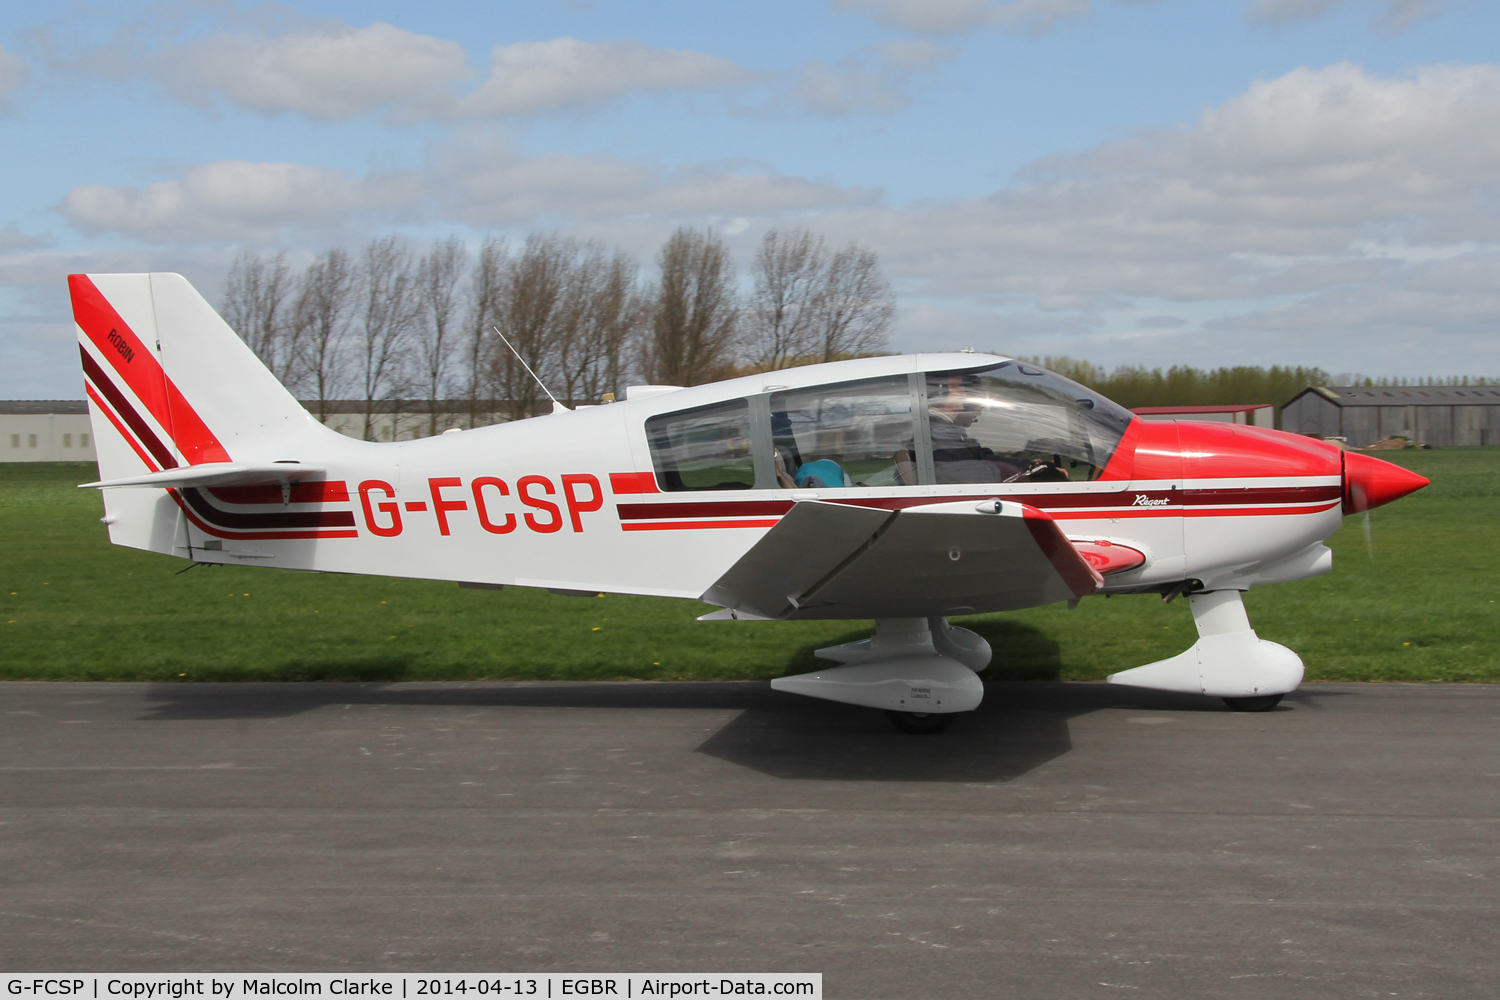 G-FCSP, 1990 Robin DR-400-180 Regent Regent C/N 2022, Robin DR-400-180 Regent at The Real Aeroplane Club's Early Bird Fly-In, Breighton Airfield, April 2014.